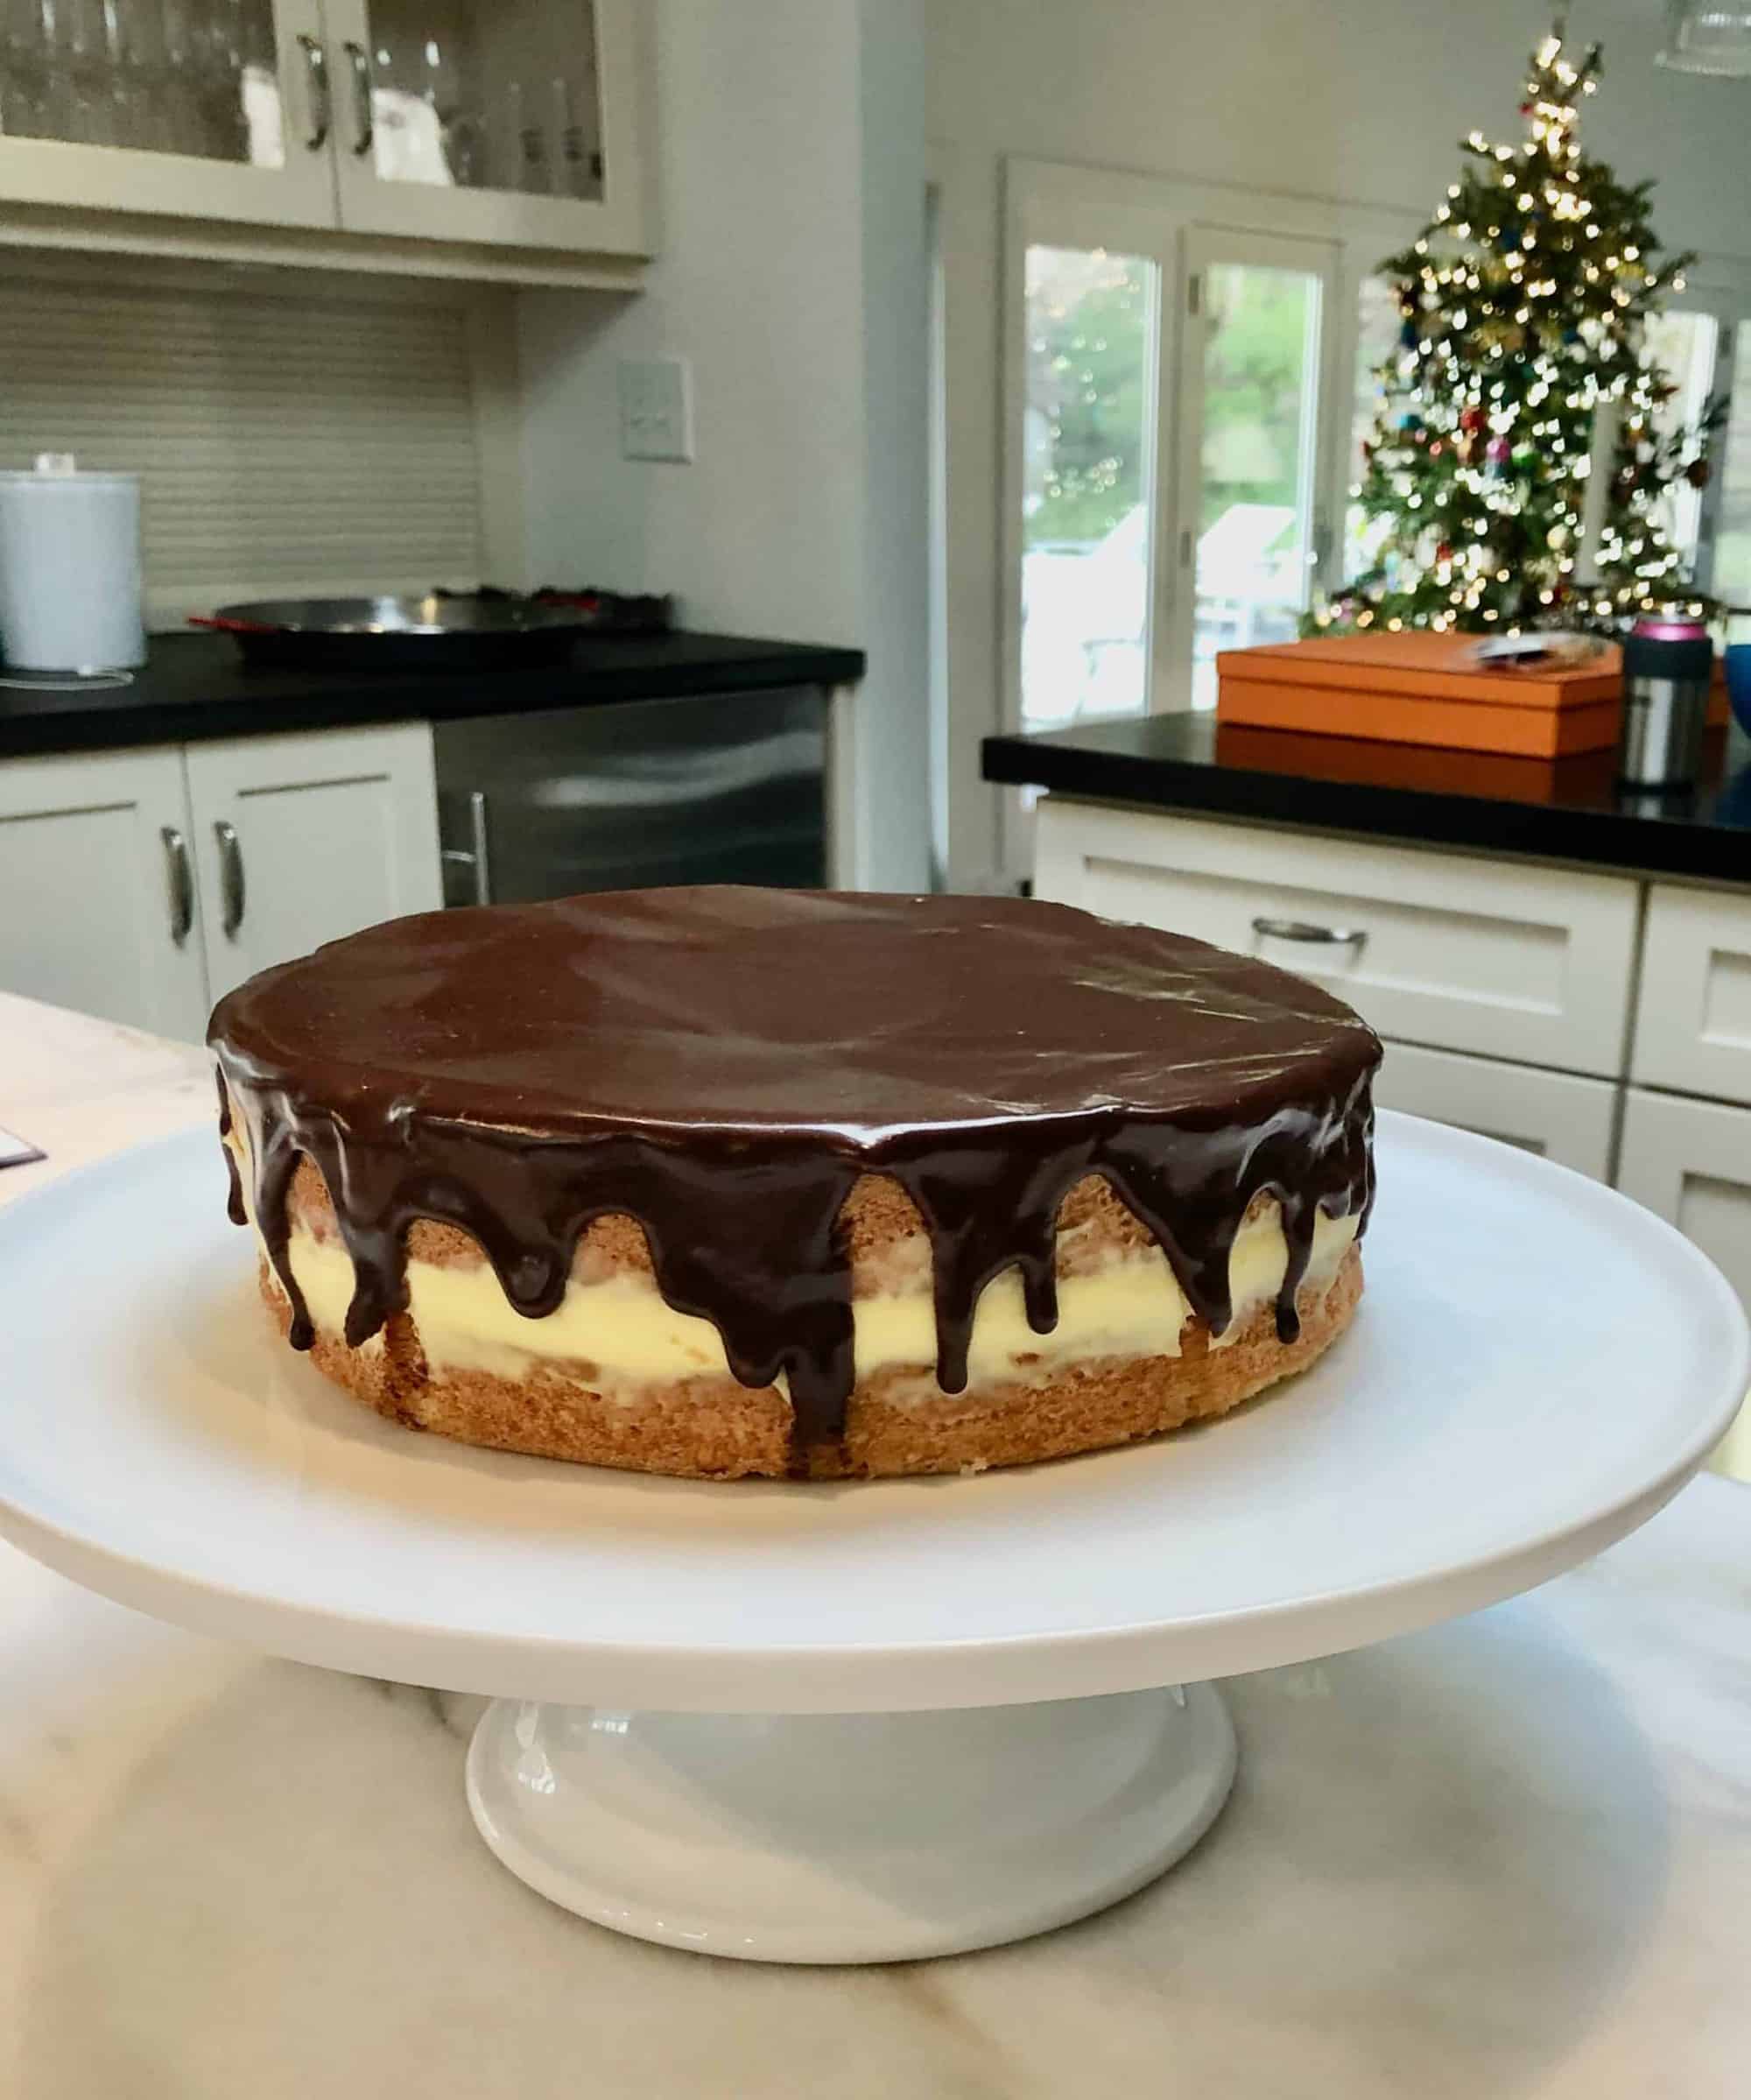 Wicked Good Boston Cream Pie from Cook’s Illustrated